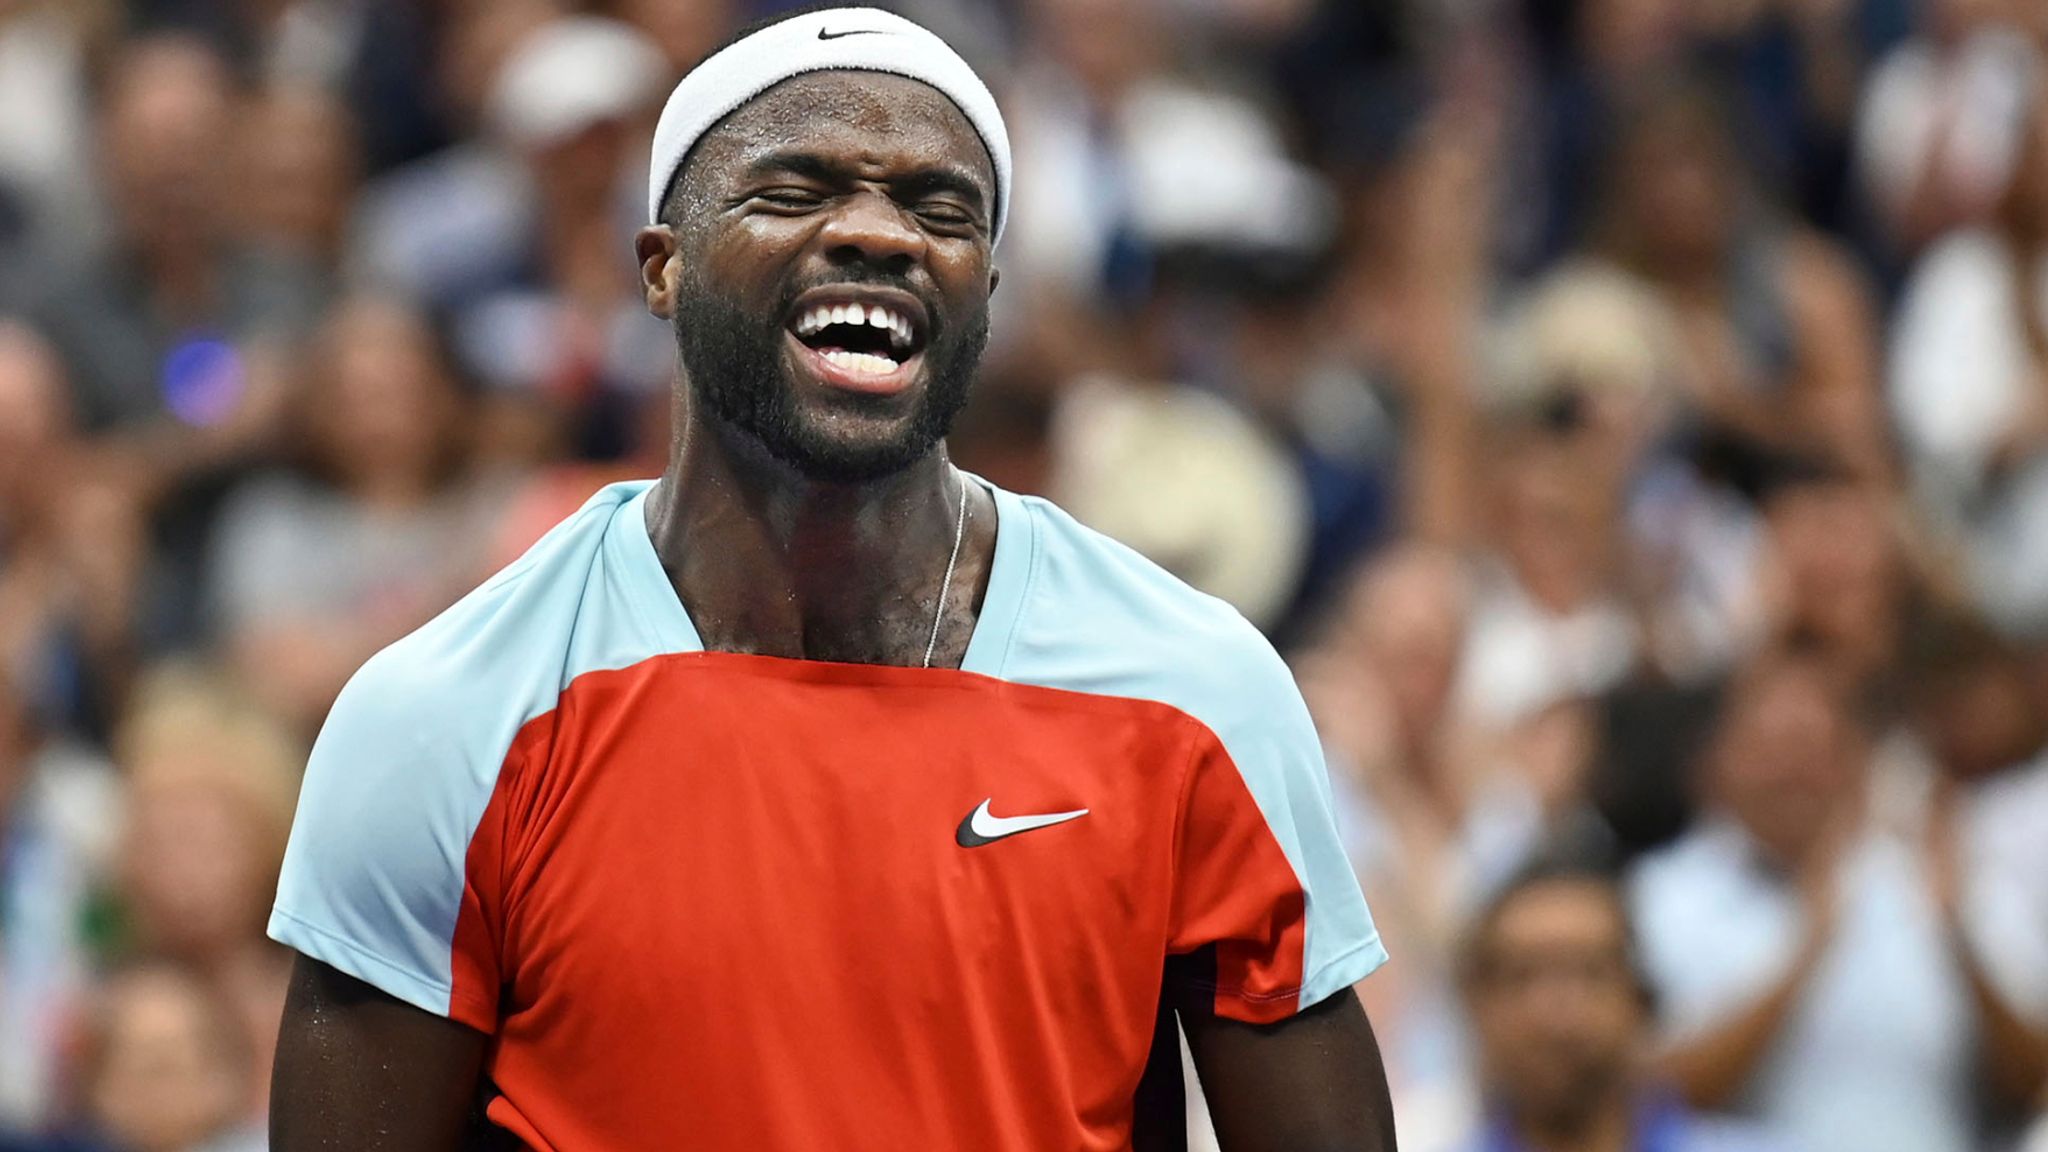 US Open Frances Tiafoe is hoping to win his first Grand Slam title but he must first get past Carlos Alcaraz Tennis News Sky Sports